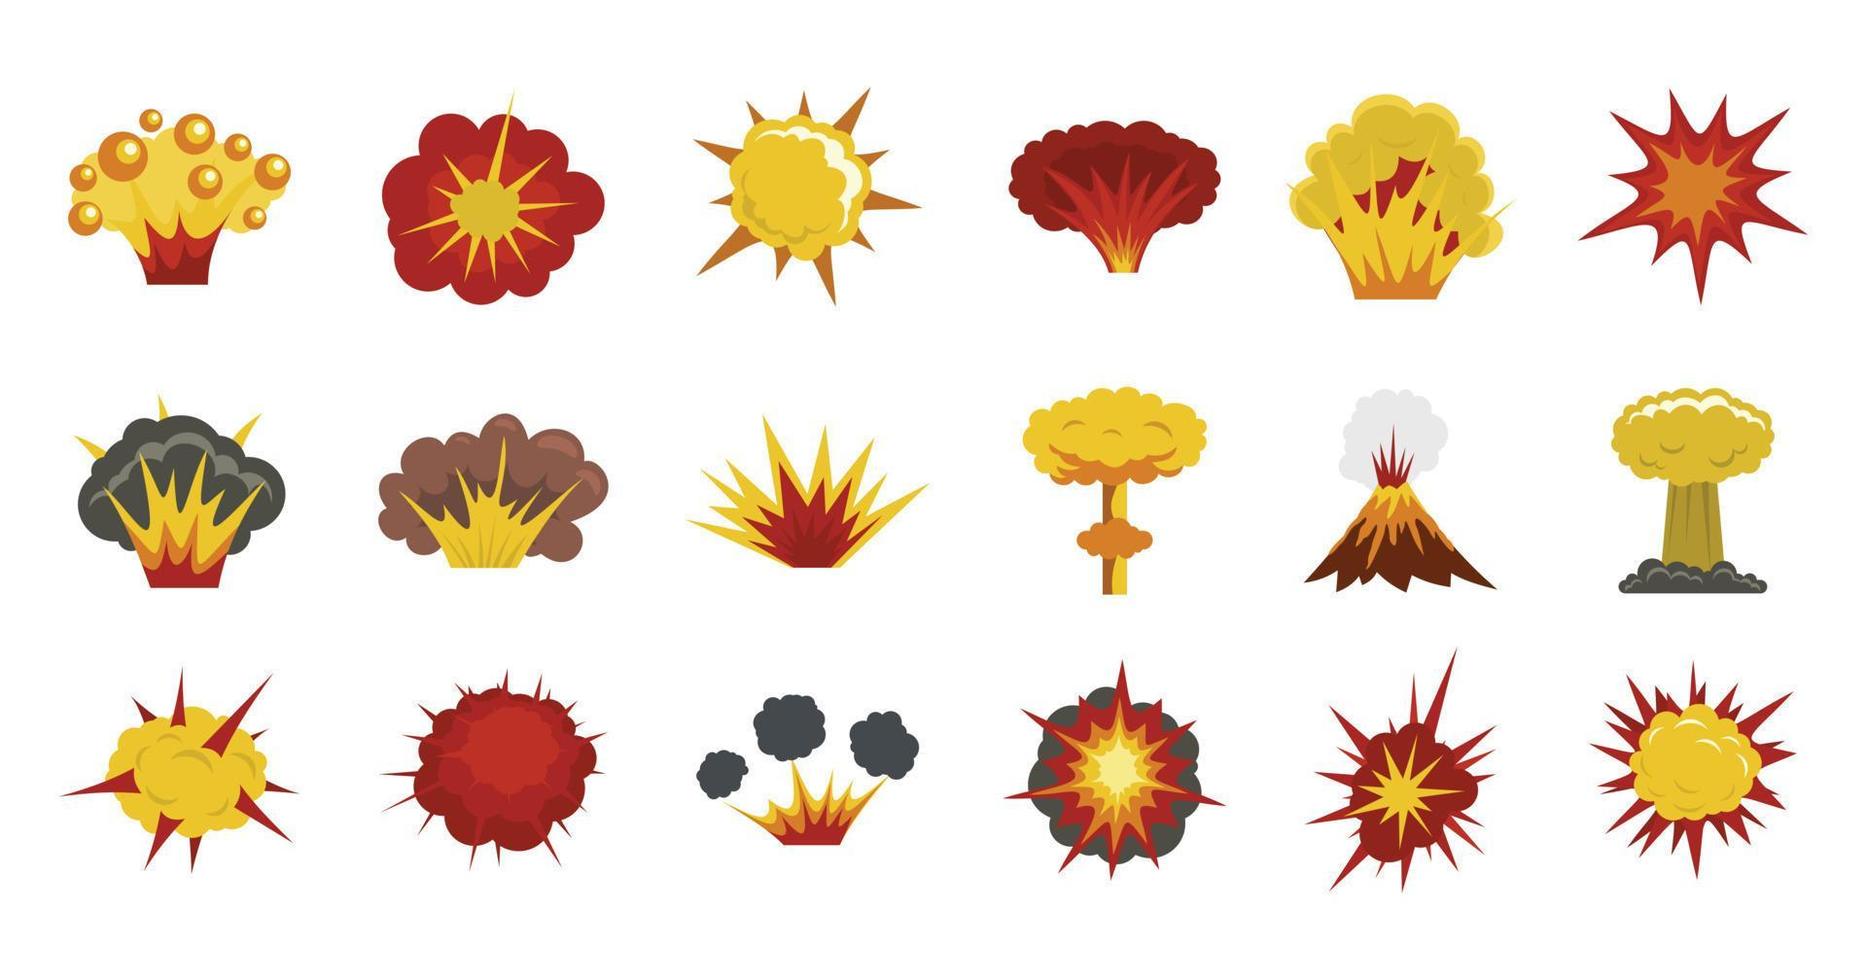 Explosion icon set, flat style vector